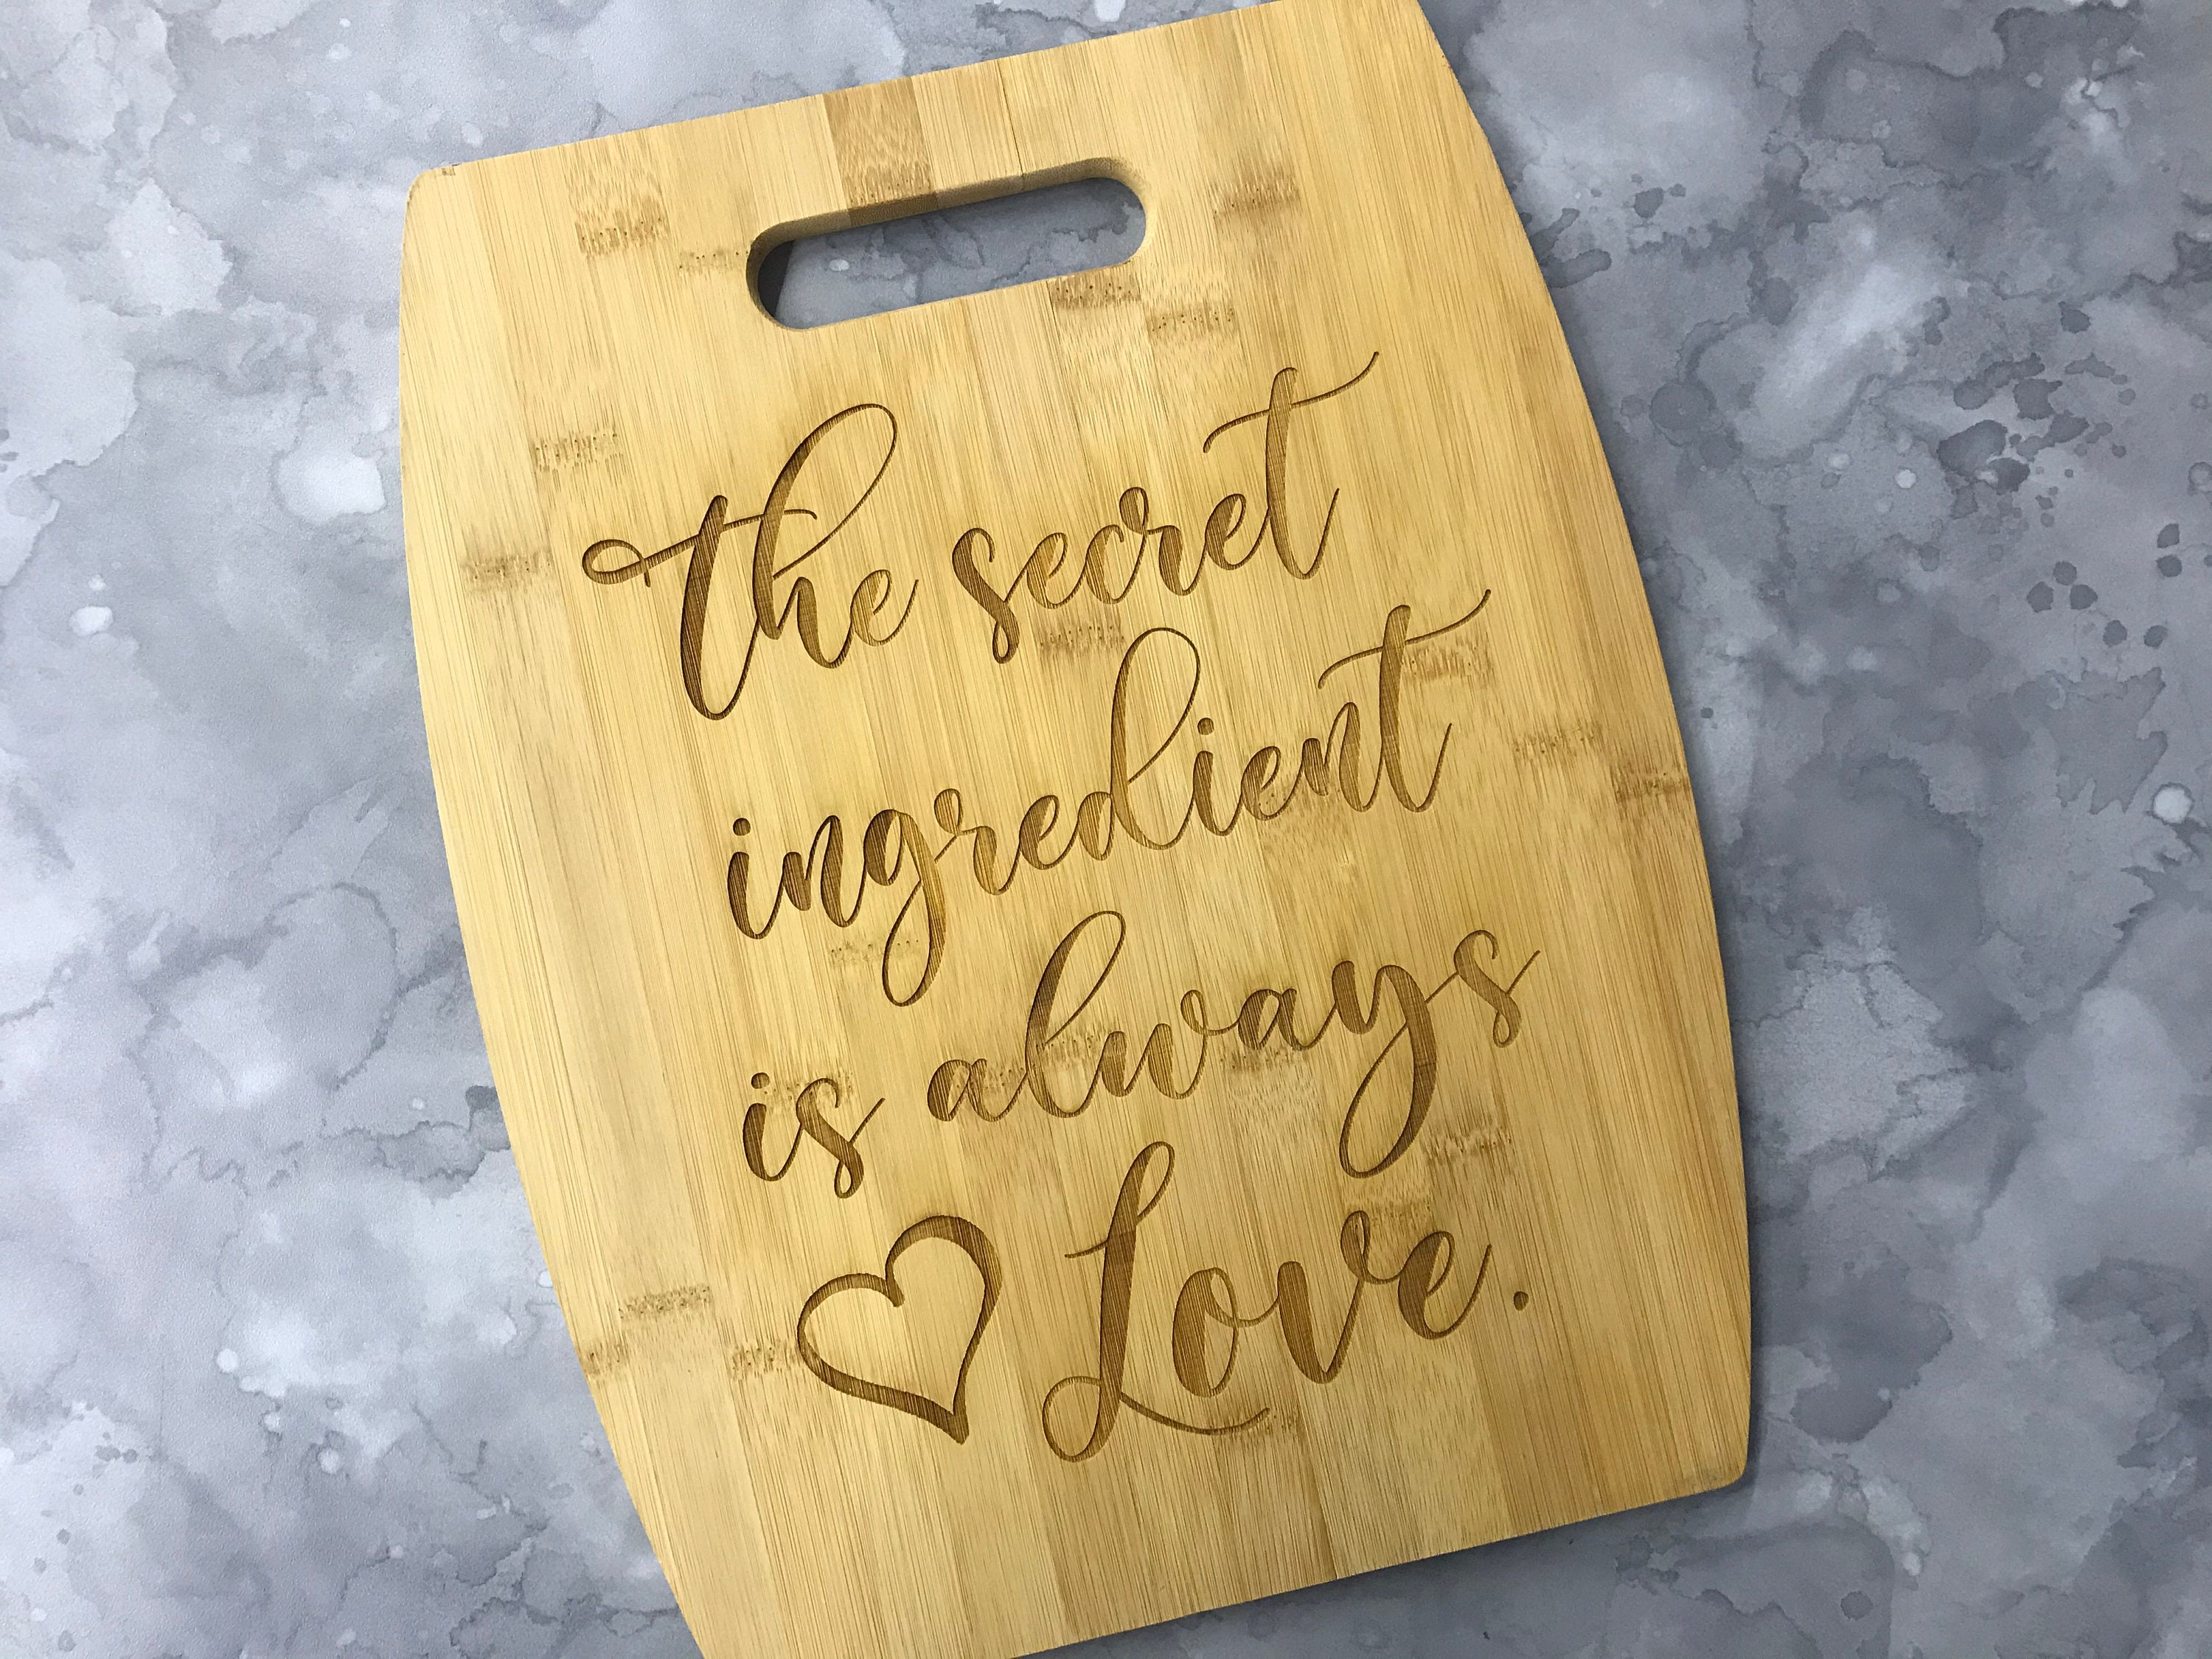 Bamboo Cutting Board Decor the Secret Ingredient is Always 